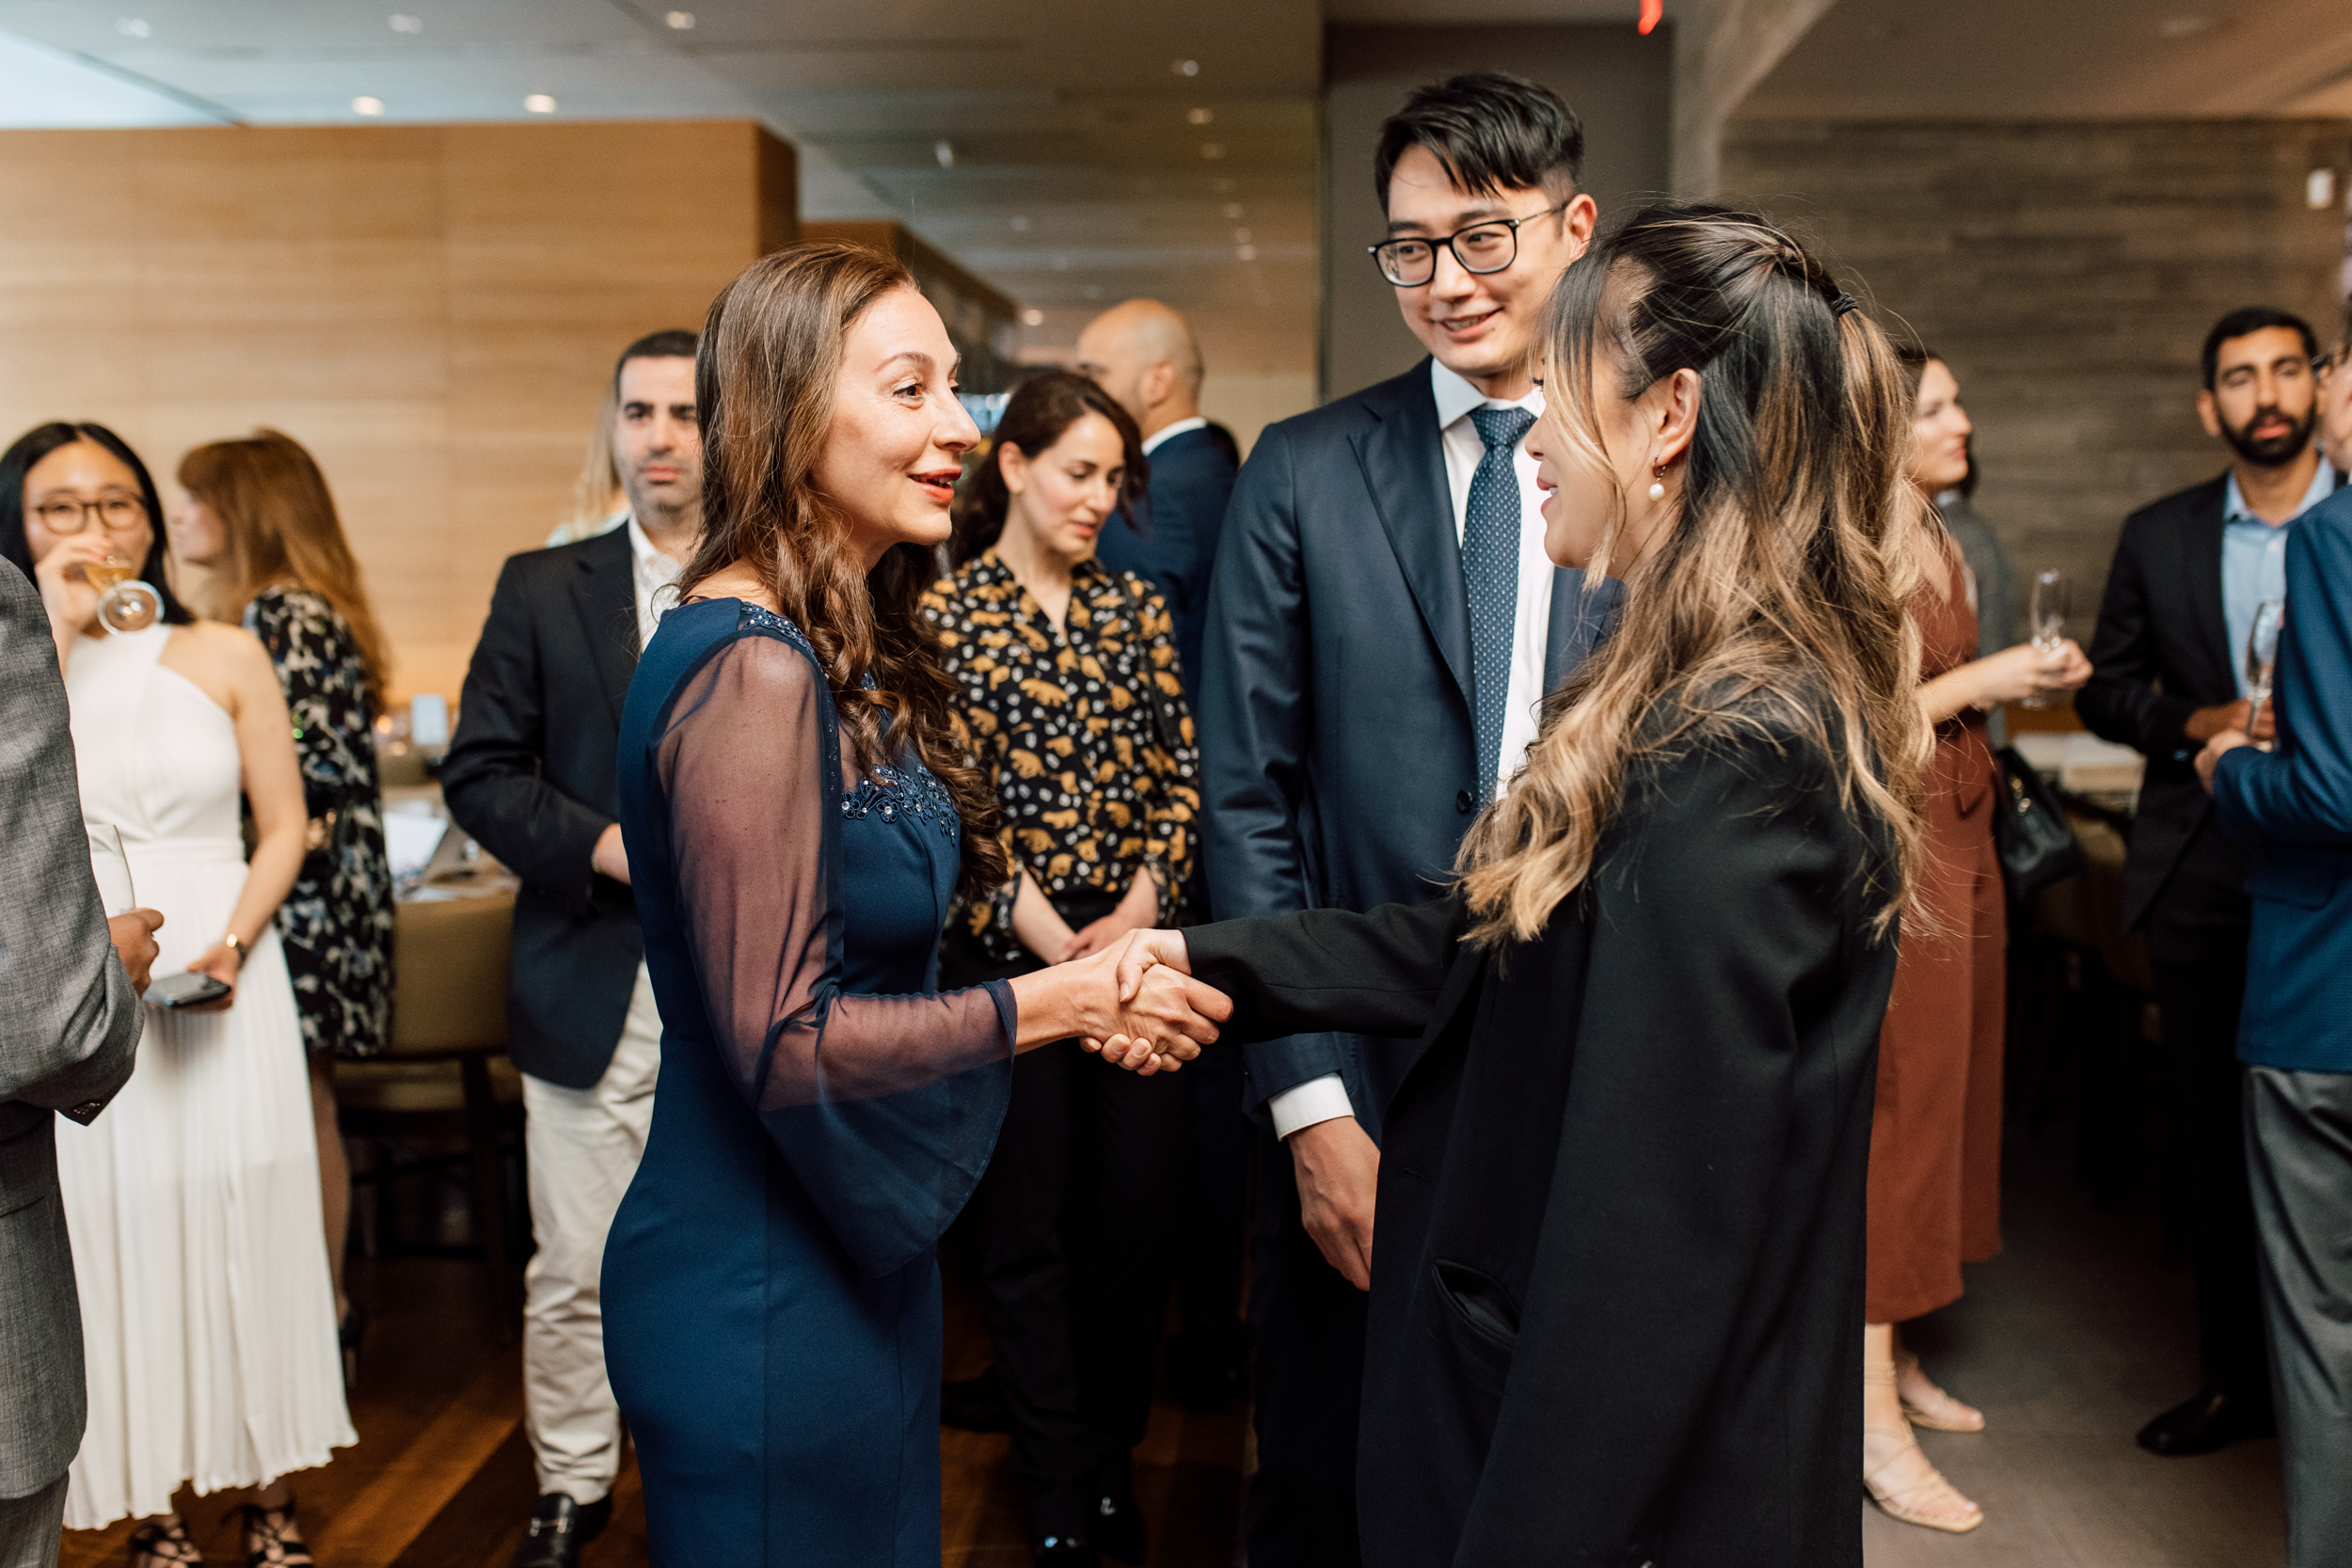 Group of people shaking hands at a graduation event.